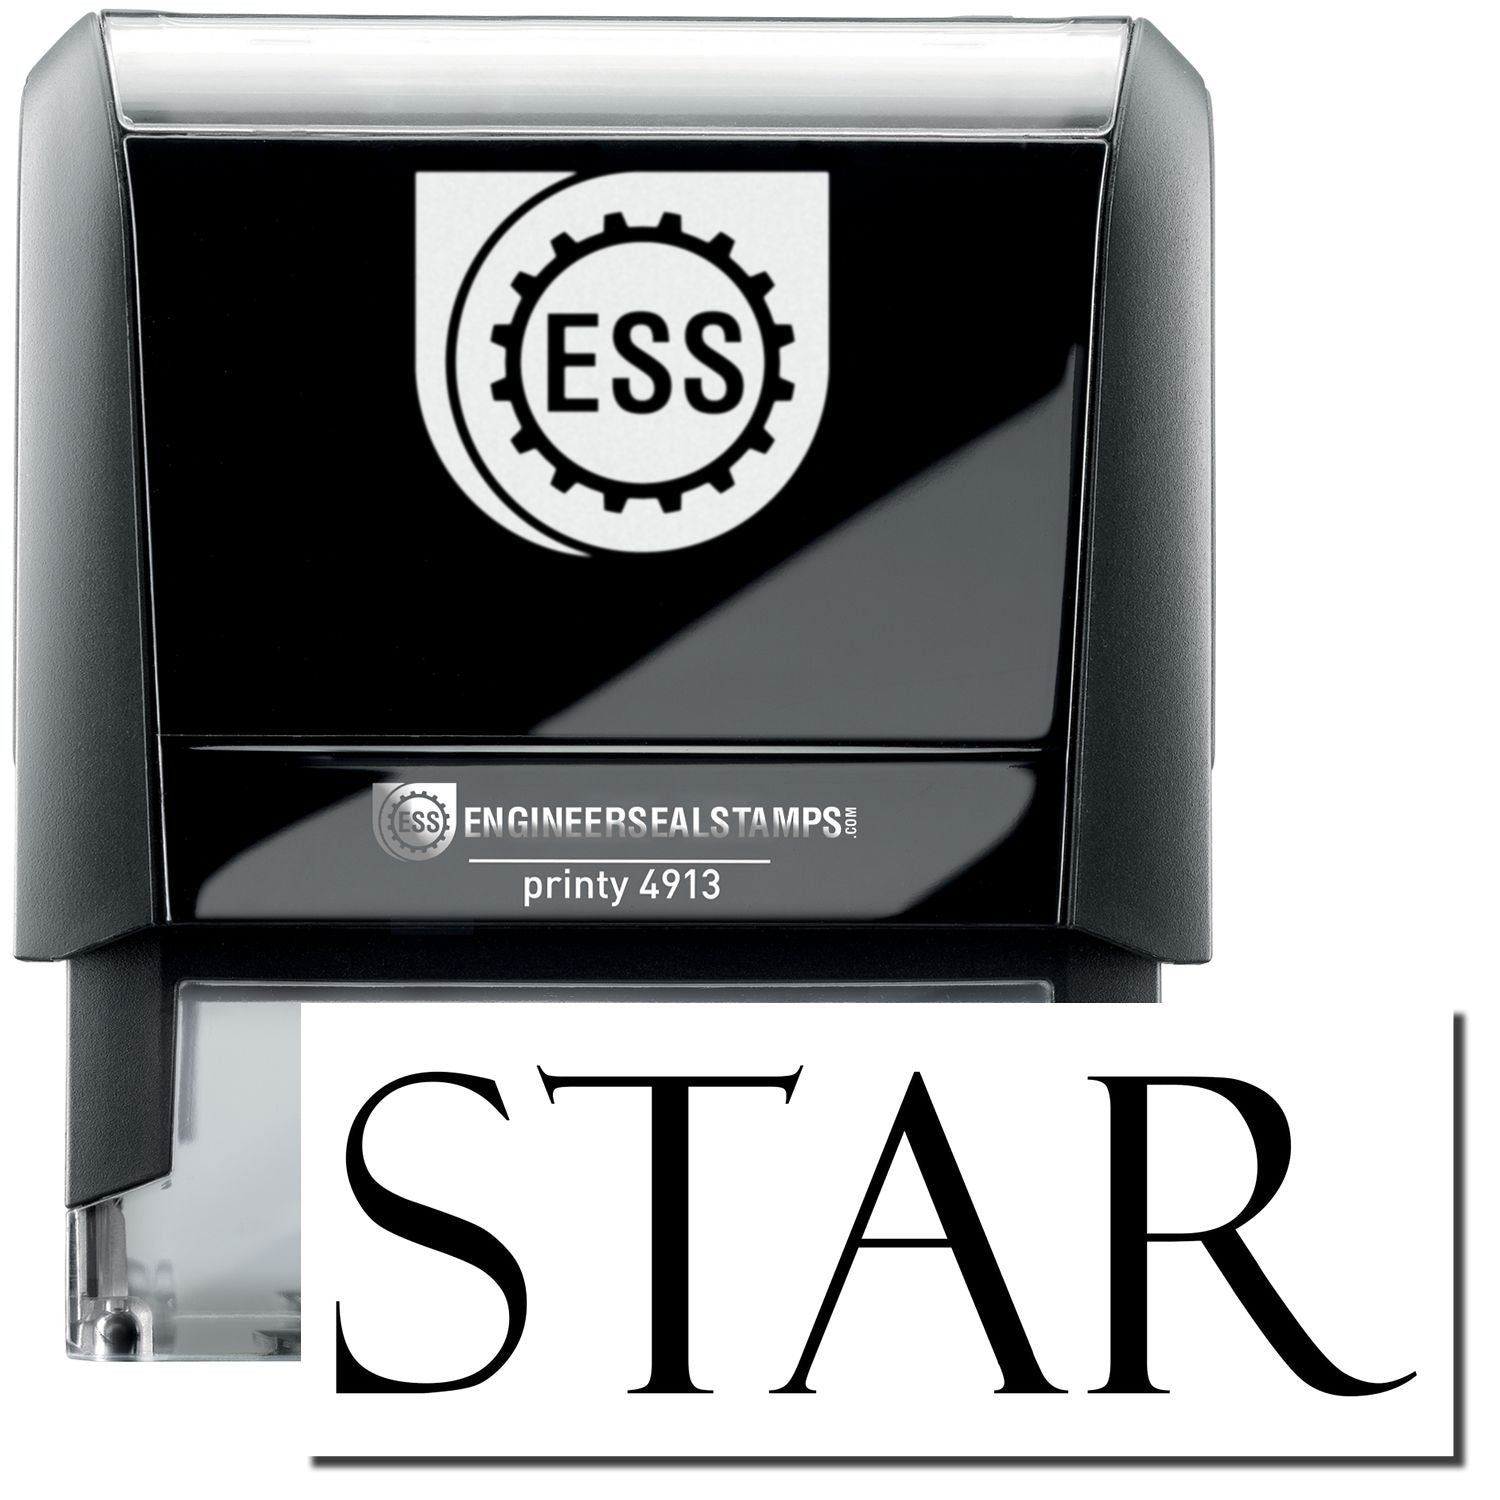 A self-inking stamp with a stamped image showing how the text "STAR" in a large bold font is displayed by it.